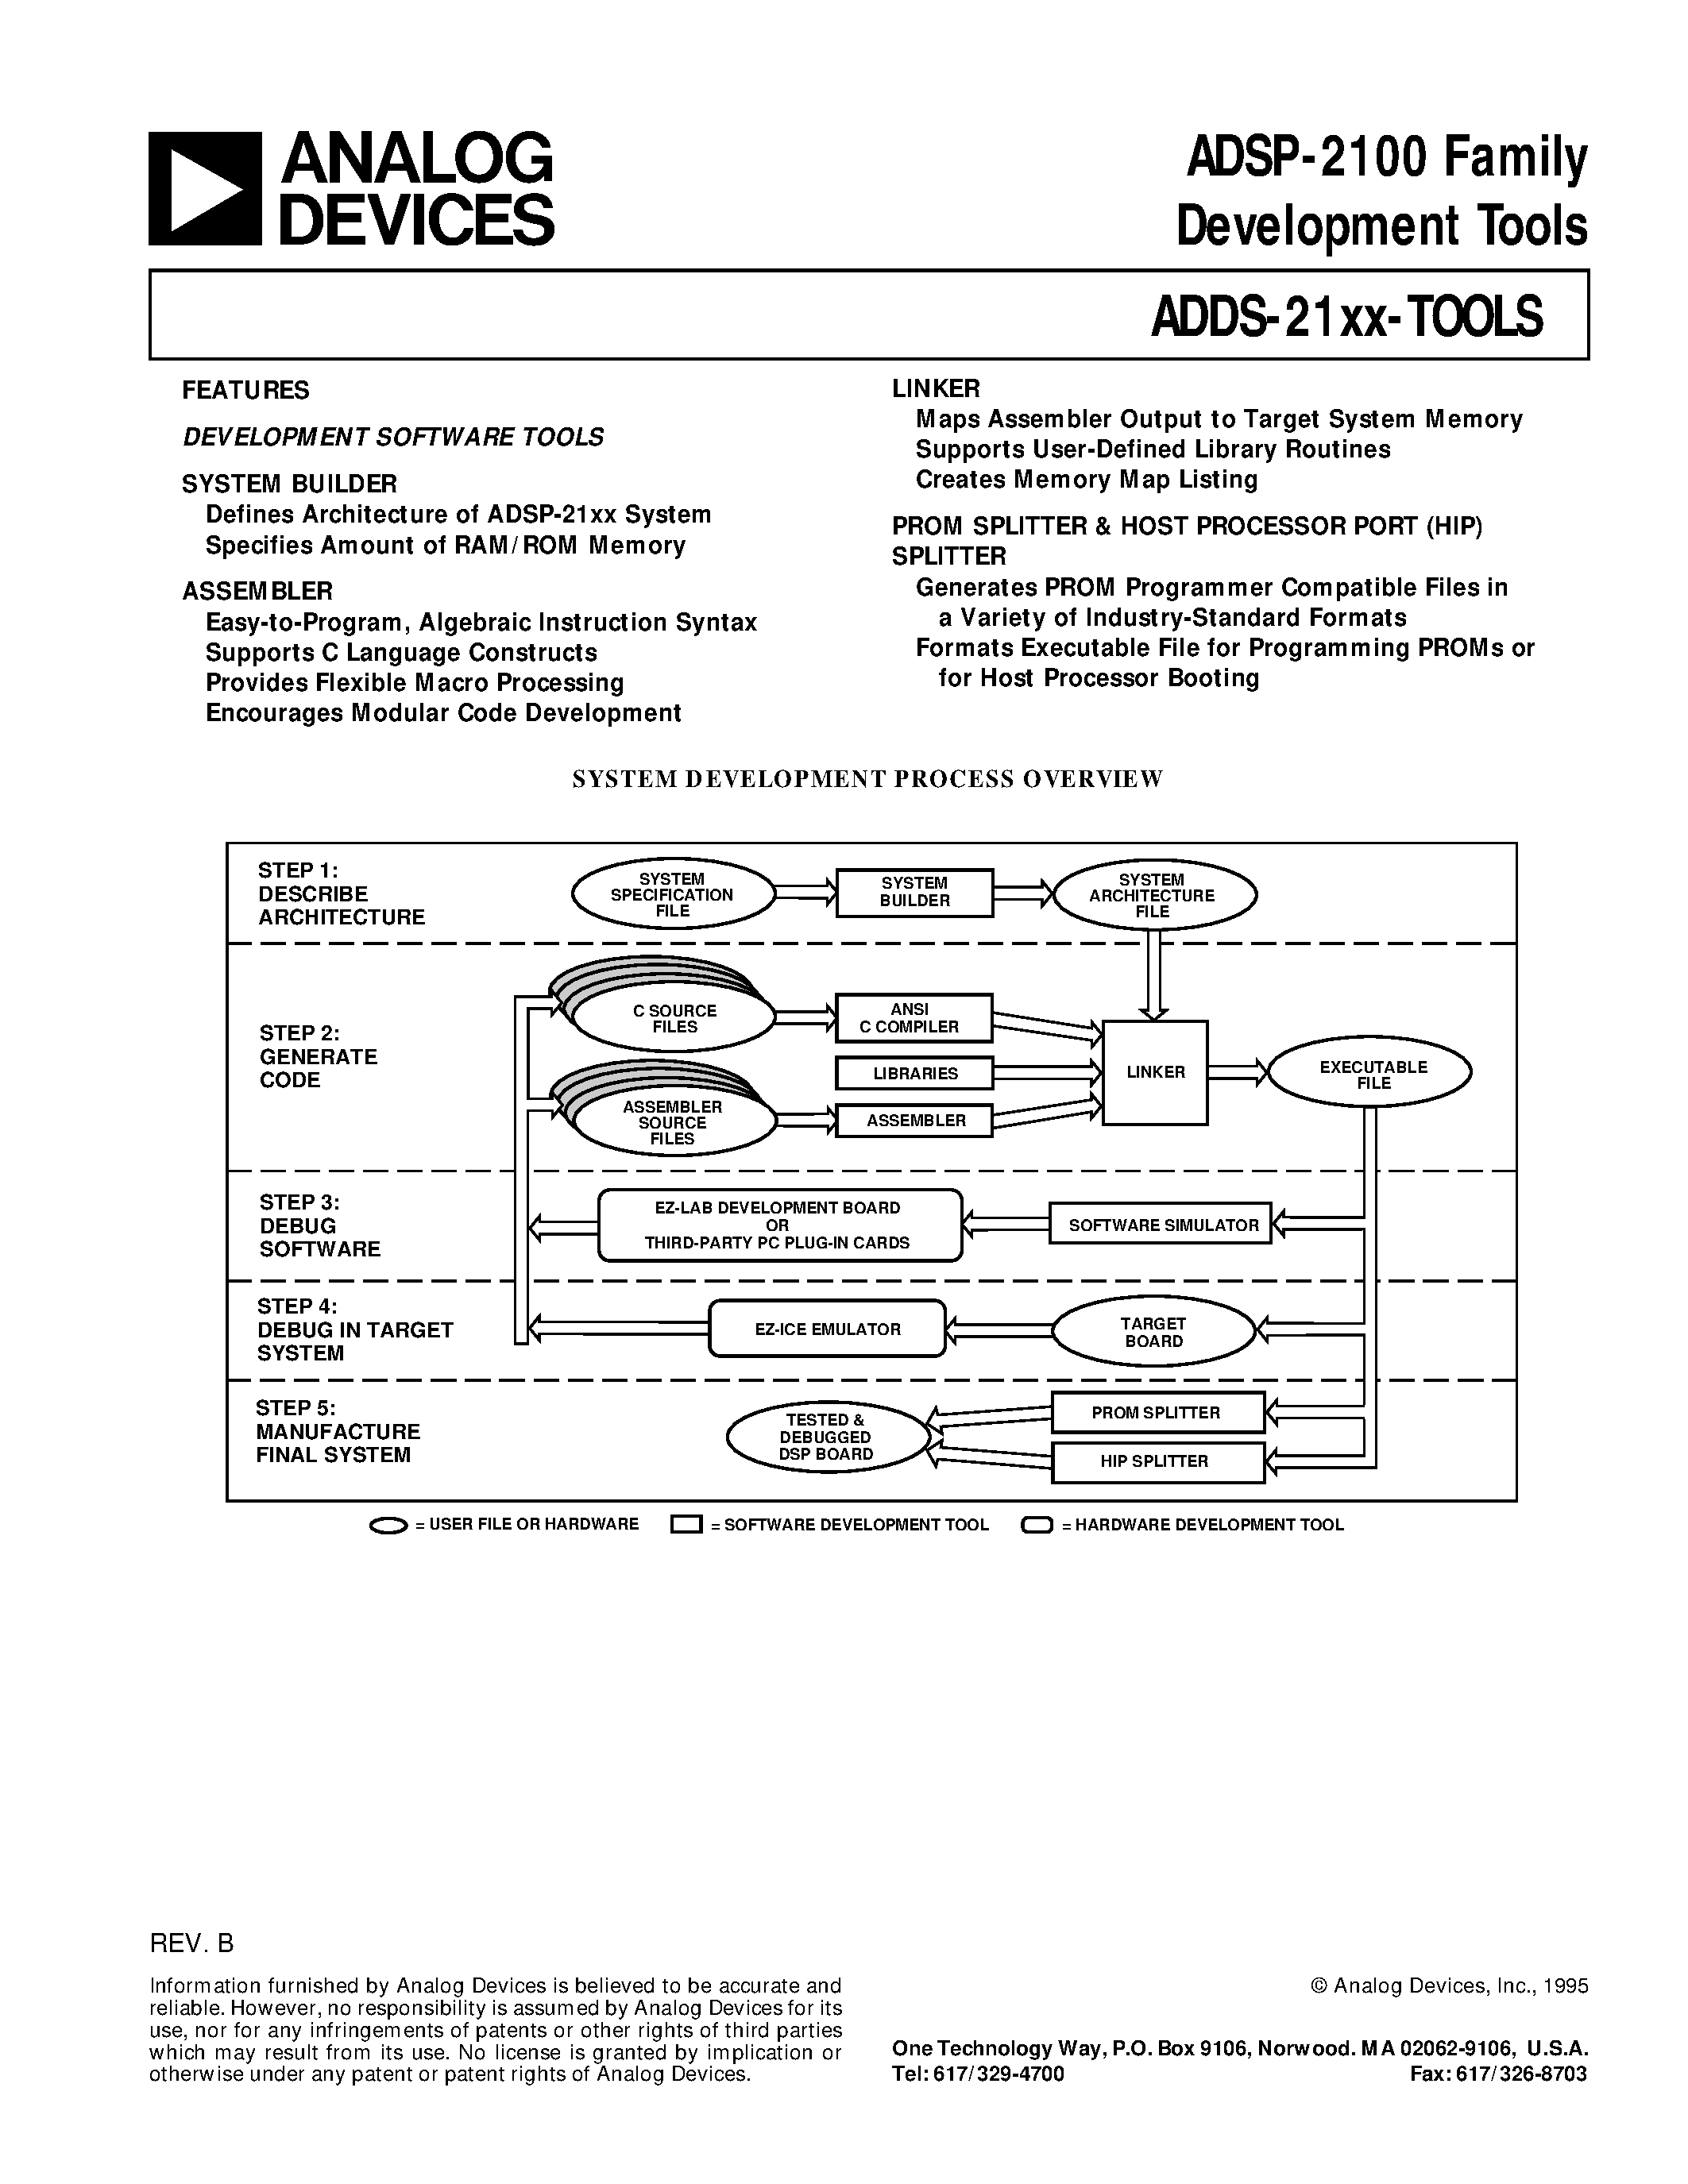 Datasheet ADDS-2181-EZ-ICE - ADSP-2100 Family Development Tools page 1